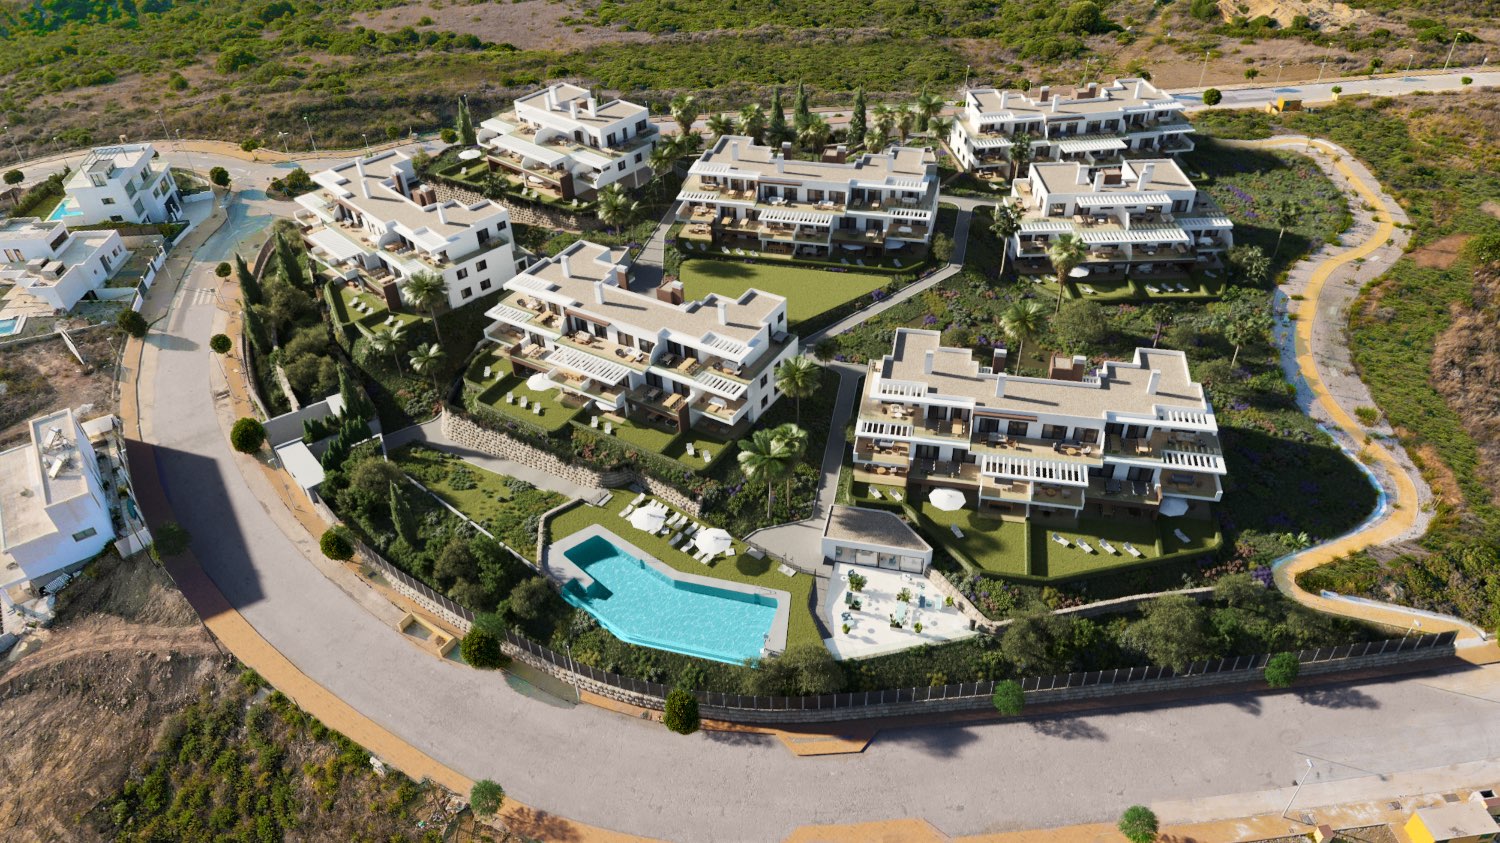 Luxury Penthouse for Sale in Casares - Costa del Sol